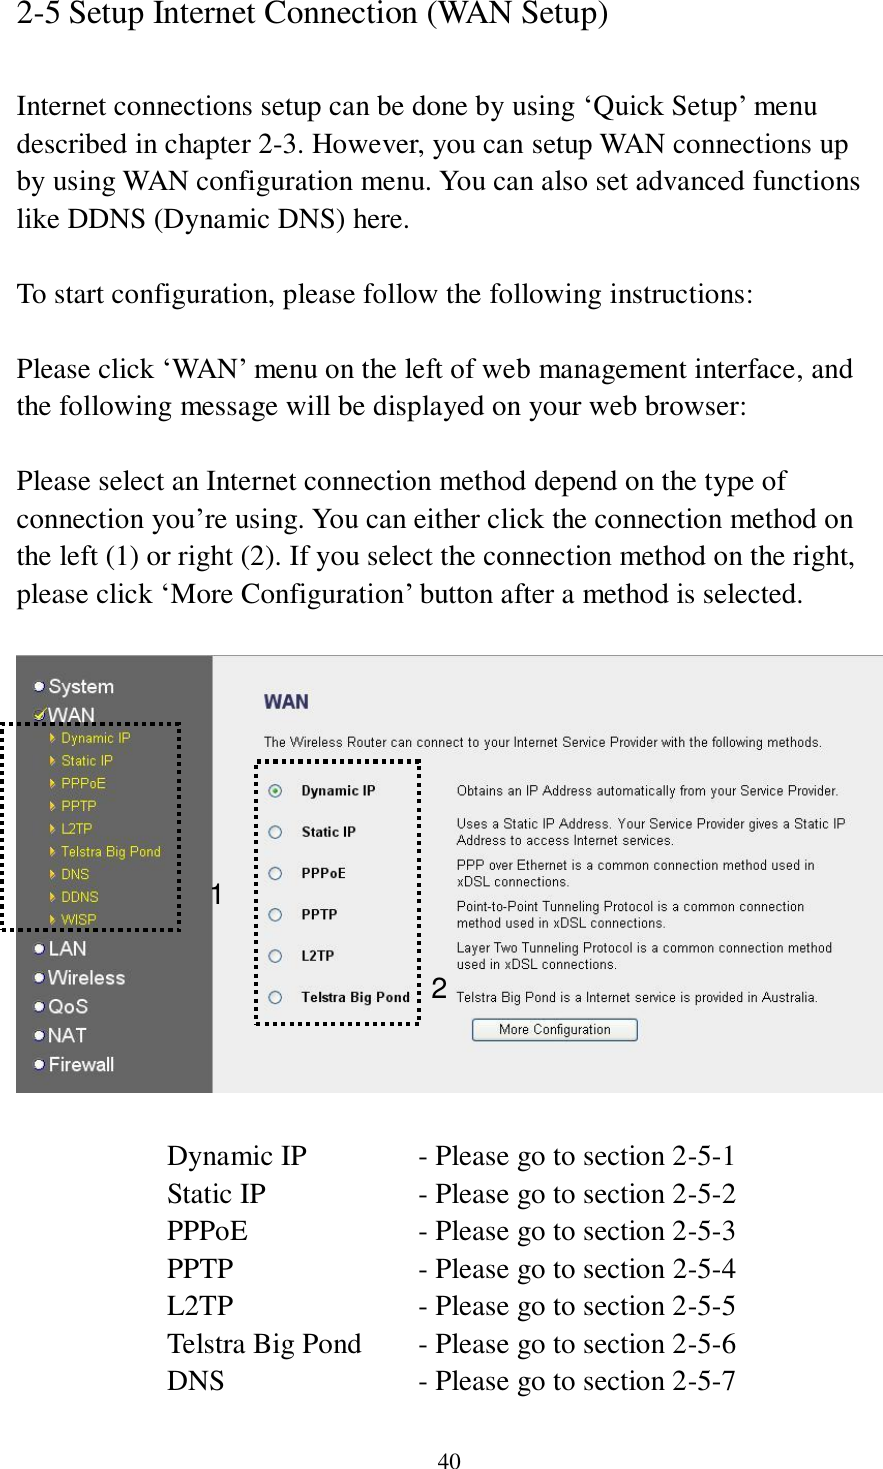 40 2-5 Setup Internet Connection (WAN Setup)  Internet connections setup can be done by using „Quick Setup‟ menu described in chapter 2-3. However, you can setup WAN connections up by using WAN configuration menu. You can also set advanced functions like DDNS (Dynamic DNS) here.  To start configuration, please follow the following instructions:  Please click „WAN‟ menu on the left of web management interface, and the following message will be displayed on your web browser:  Please select an Internet connection method depend on the type of connection you‟re using. You can either click the connection method on the left (1) or right (2). If you select the connection method on the right, please click „More Configuration‟ button after a method is selected.    Dynamic IP     - Please go to section 2-5-1 Static IP       - Please go to section 2-5-2 PPPoE        - Please go to section 2-5-3 PPTP        - Please go to section 2-5-4 L2TP        - Please go to section 2-5-5 Telstra Big Pond   - Please go to section 2-5-6 DNS        - Please go to section 2-5-7 1 2 